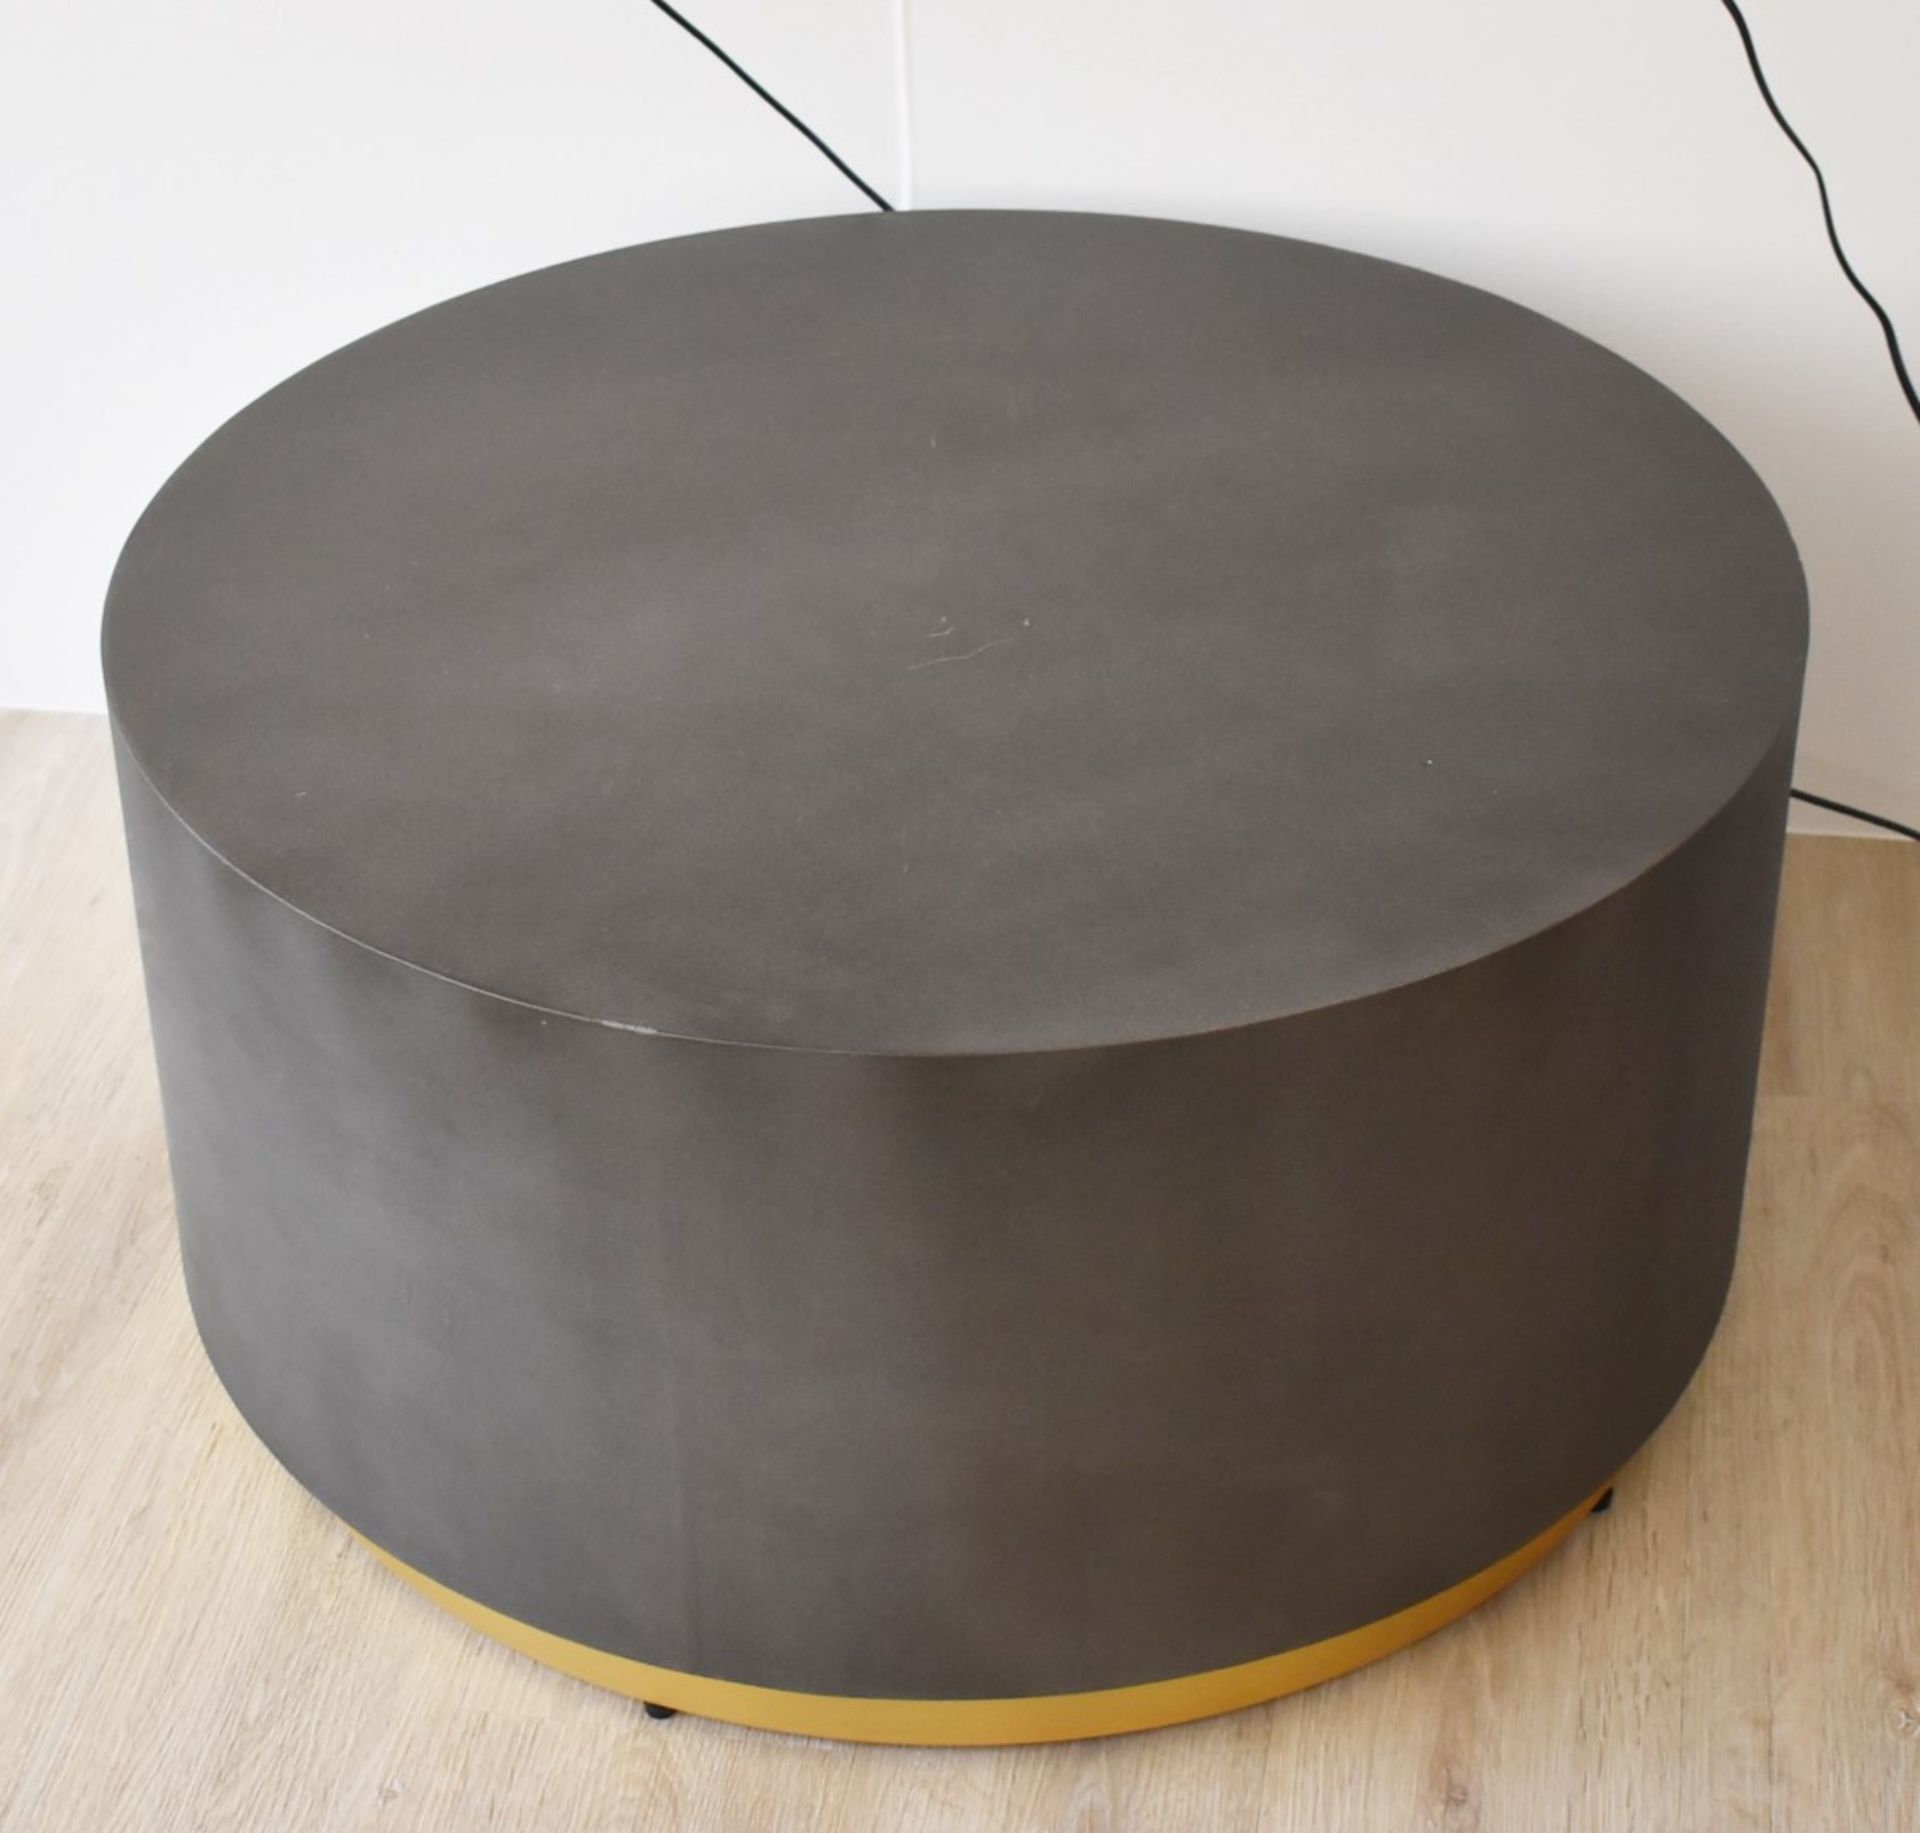 1 x Round Coffee Table With Concrete Effect Finish and Gold Base - RRP £455 - NO VAT ON THE HAMMER! - Image 2 of 7